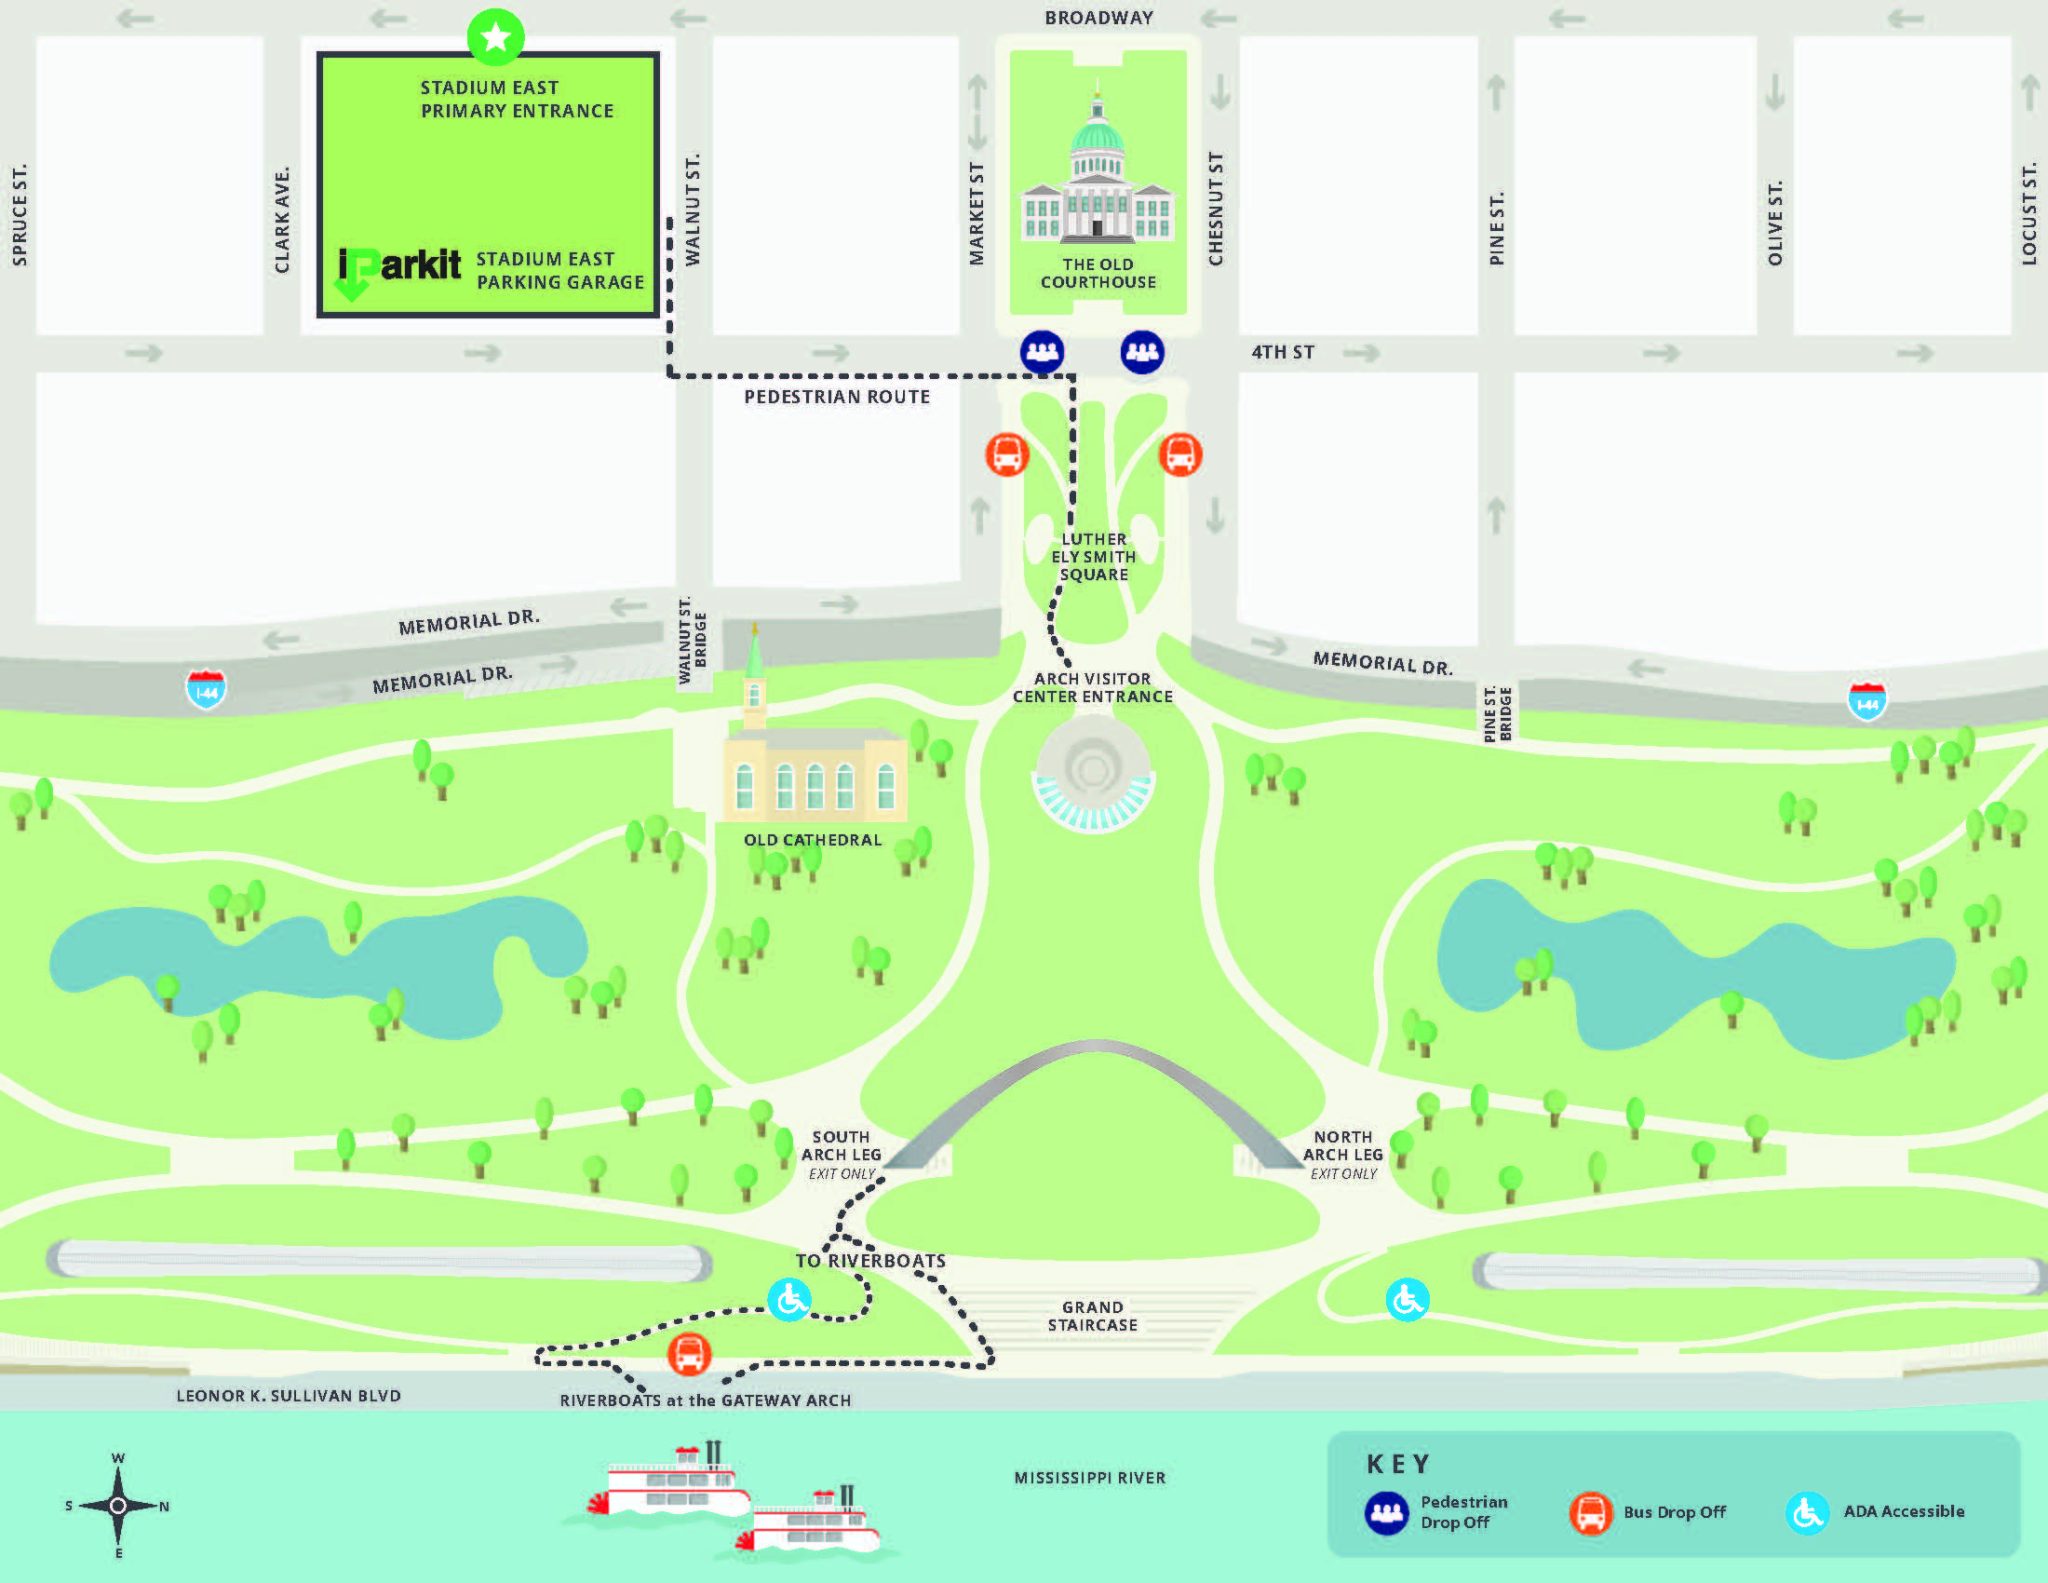 Map illustration of the Gateway Arch grounds